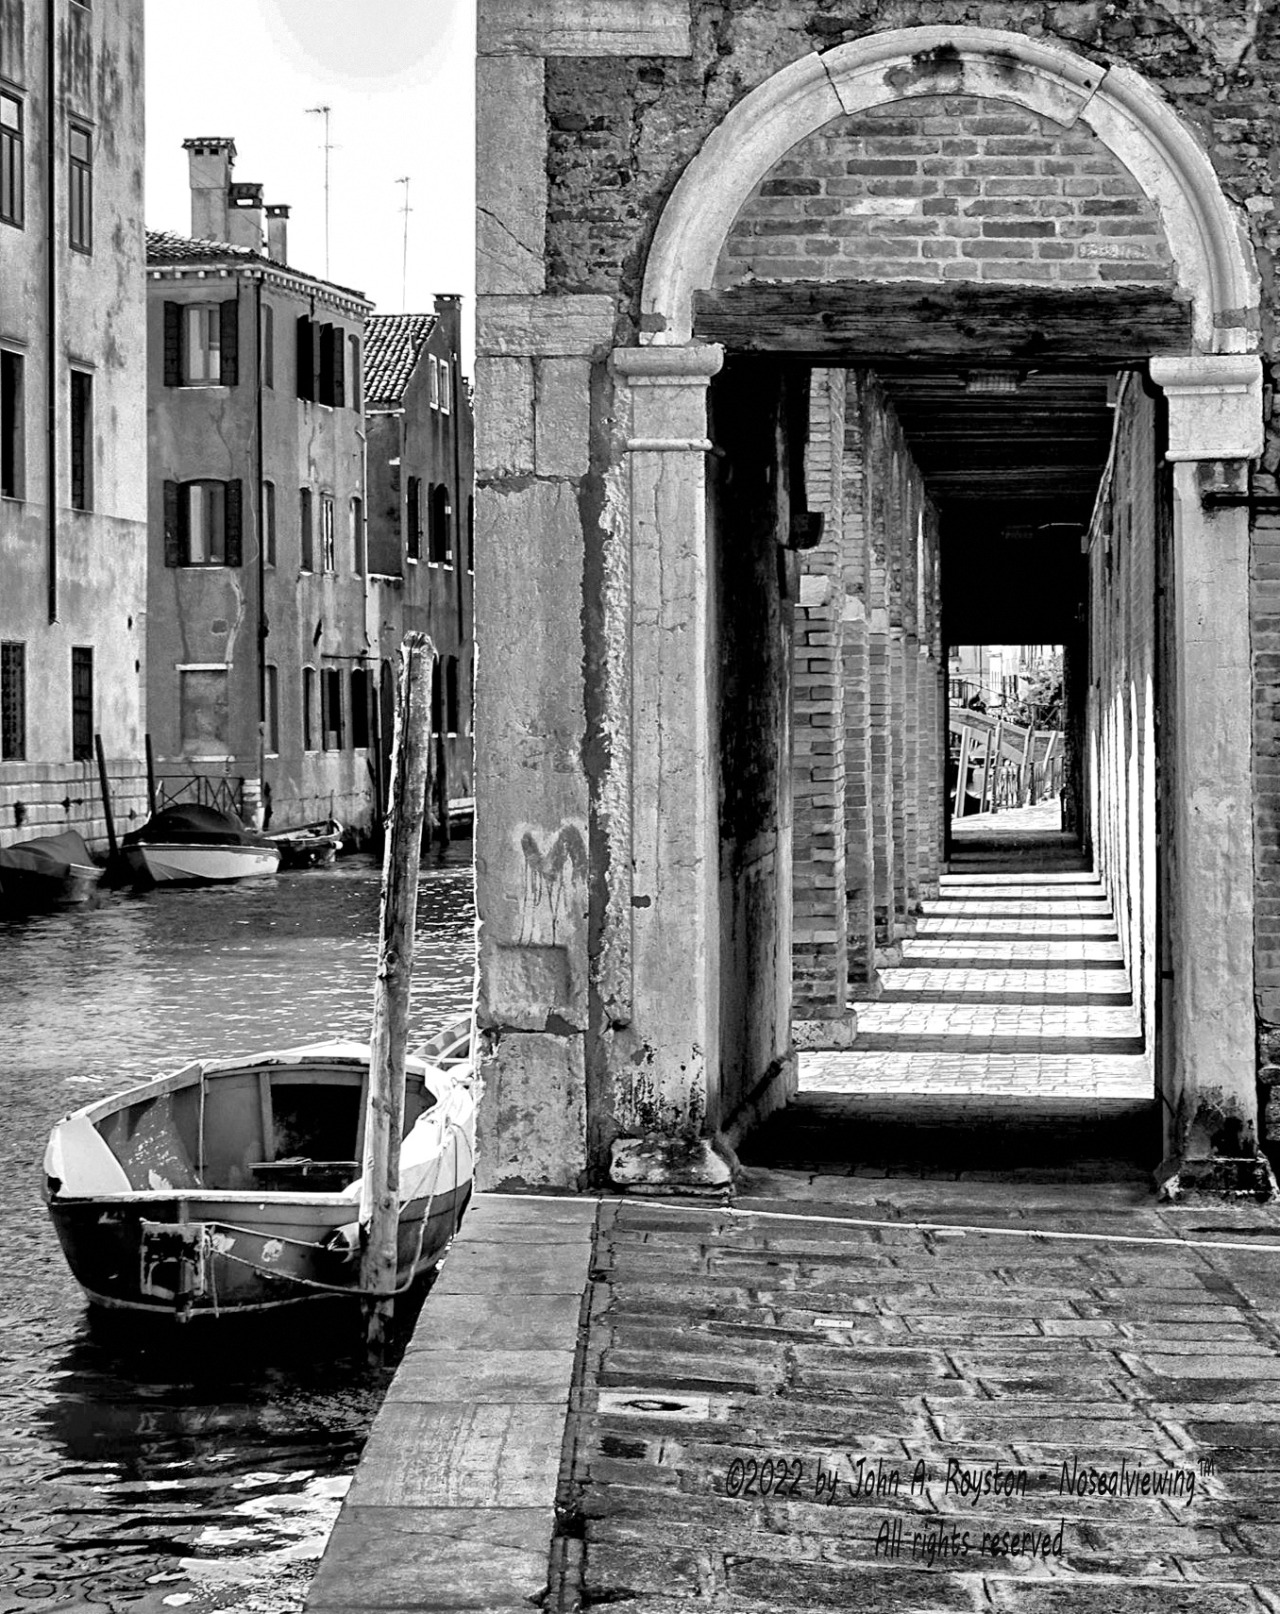 Shadows - Venice, Italy©2022 by John A. Royston - Nosealviewing™
All rights reserved #Black and White #lensblr#luxlit#orginal photographers #photographers on tumblr #nosealviewing